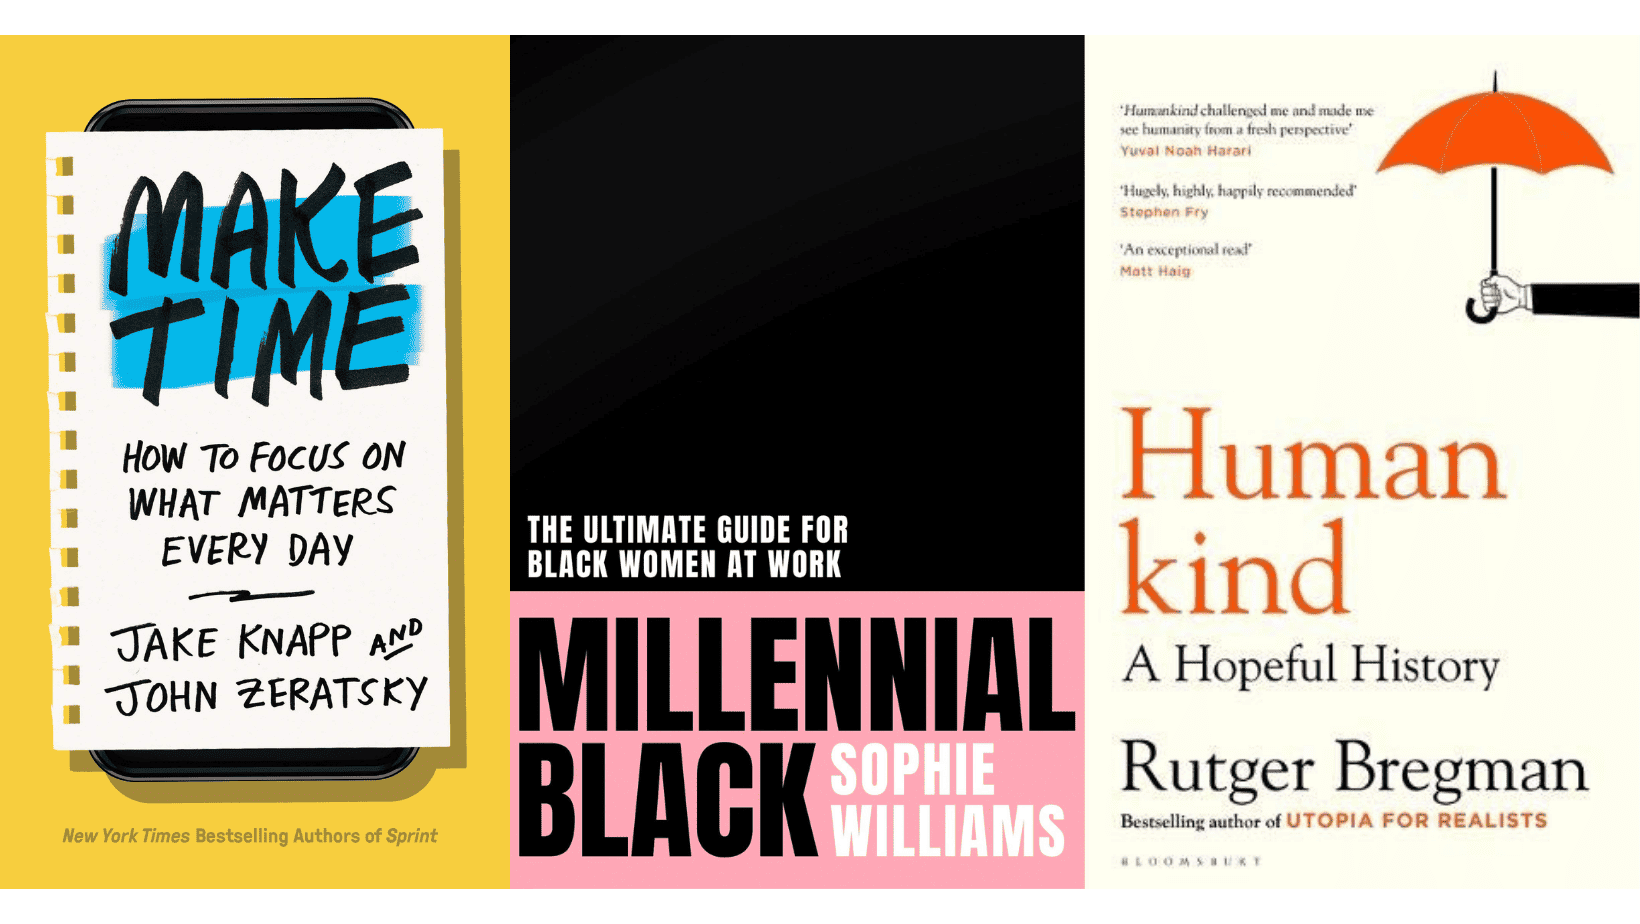 Three book covers in a graphic. From left to right they are "Make Time" by Jake Knapp and John Zeratsky, "Millennial Black" by Sophie Williams and "Human Kind" by Rutger Bretman